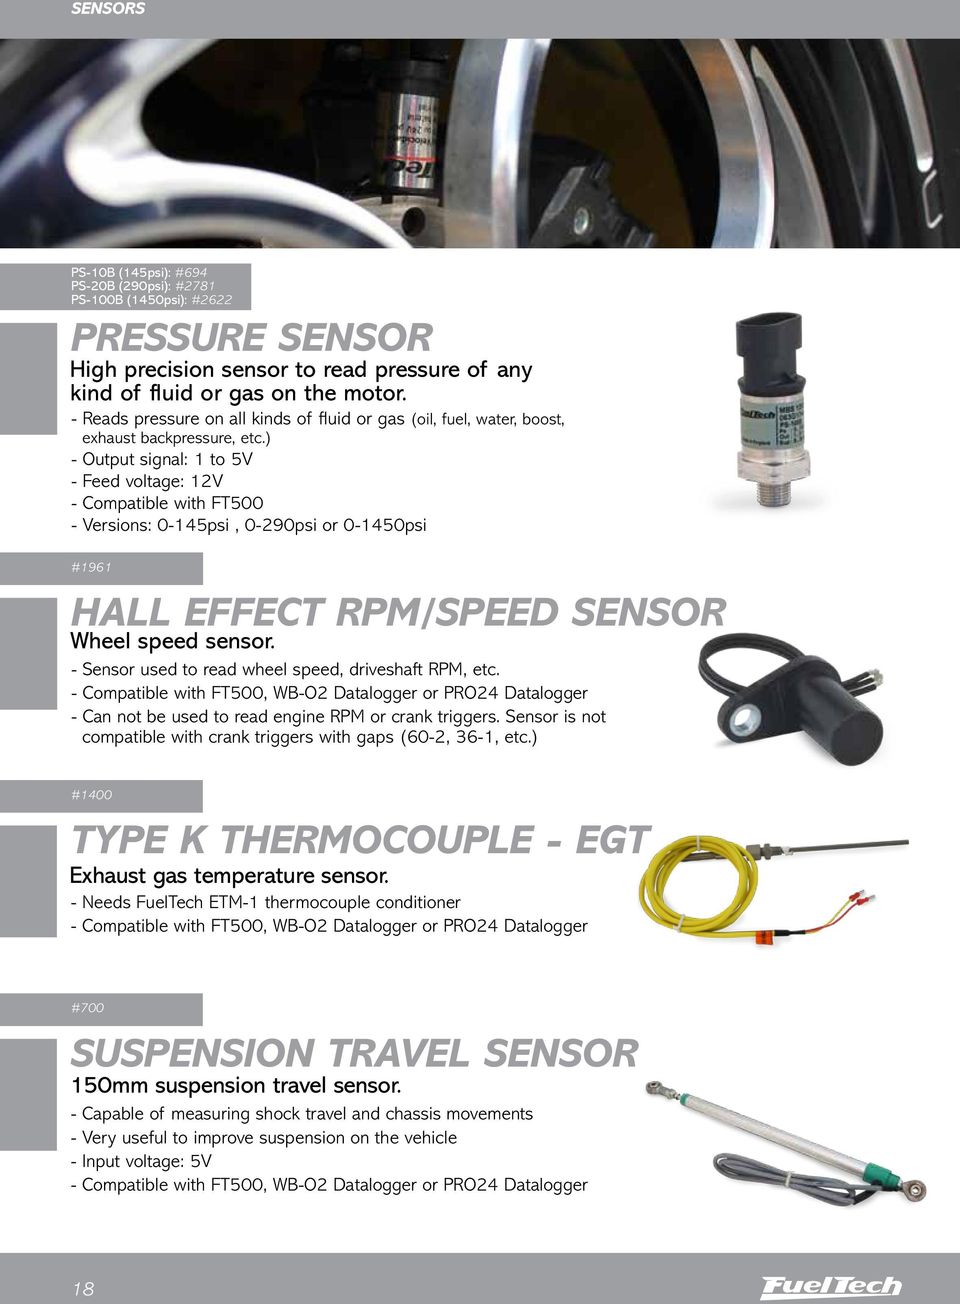 ) - Output signal: 1 to 5V - Feed voltage: 12V - Compatible with FT500 - Versions: 0-145psi, 0-290psi or 0-1450psi #1961 HALL EFFECT RPM/SPEED SENSOR Wheel speed sensor.